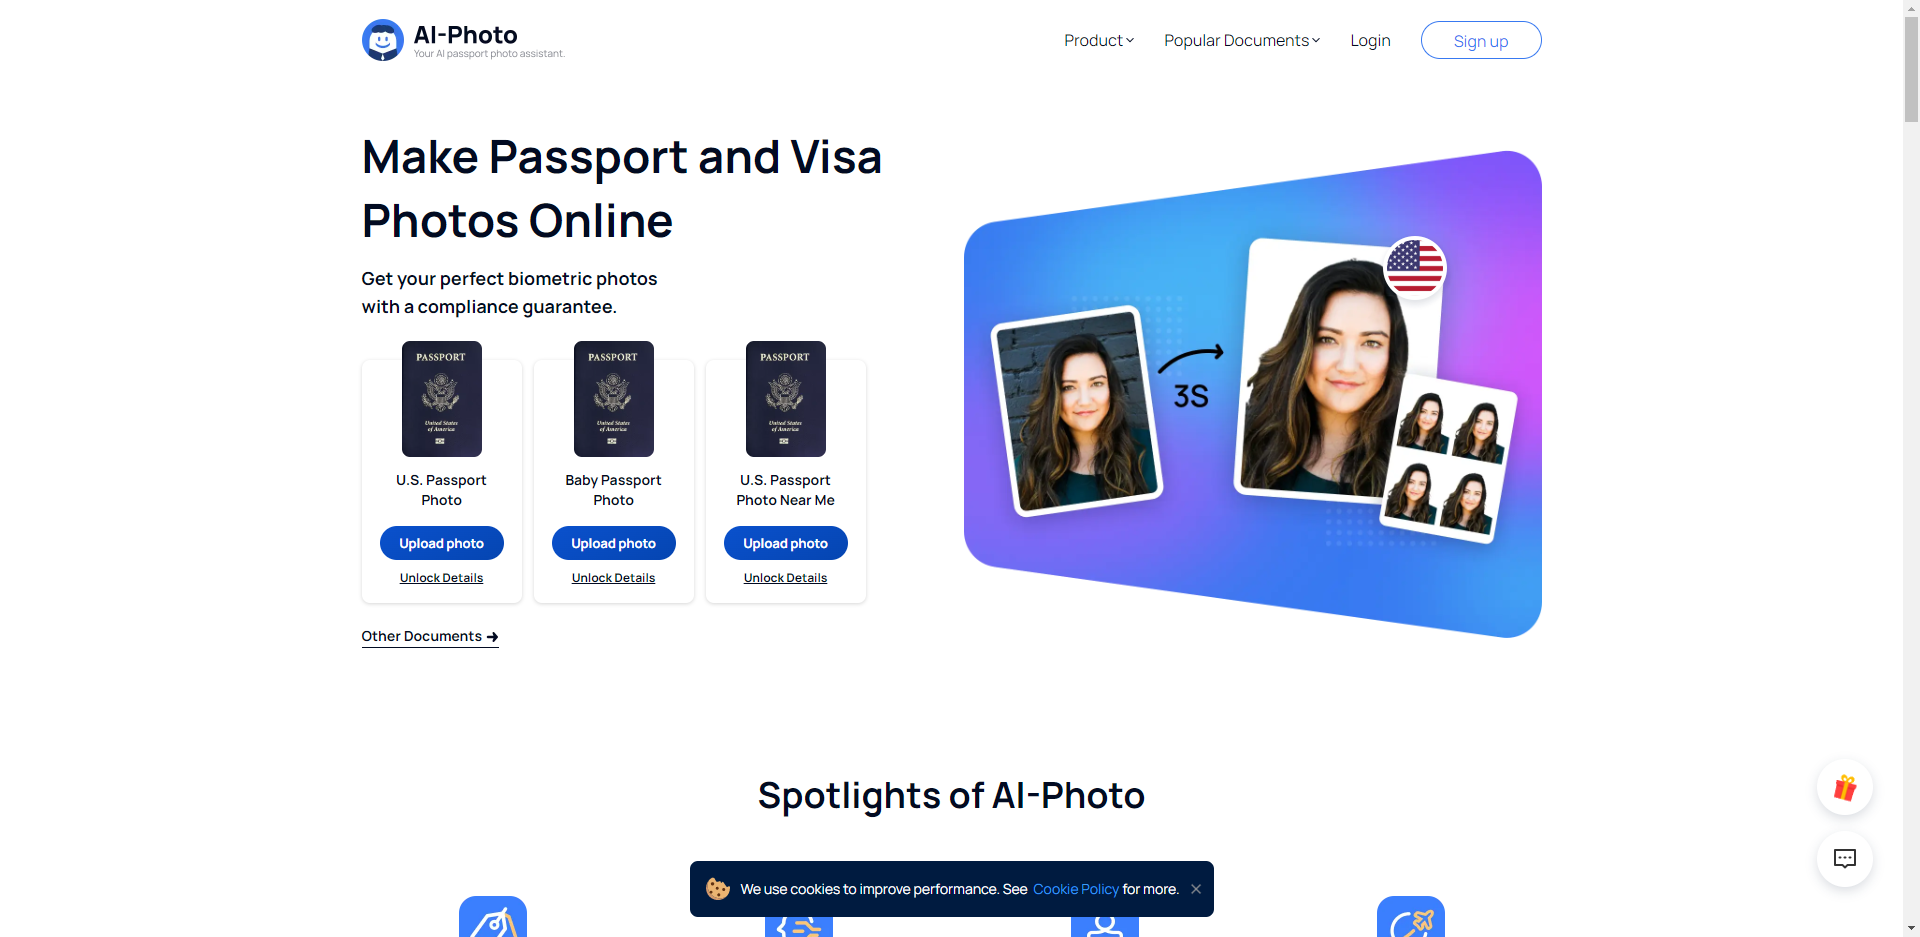 AiPassportPhotos offers a selection of services for users to choose from, including passport and visa photo services, as well as options for creating other enjoyable pictures.